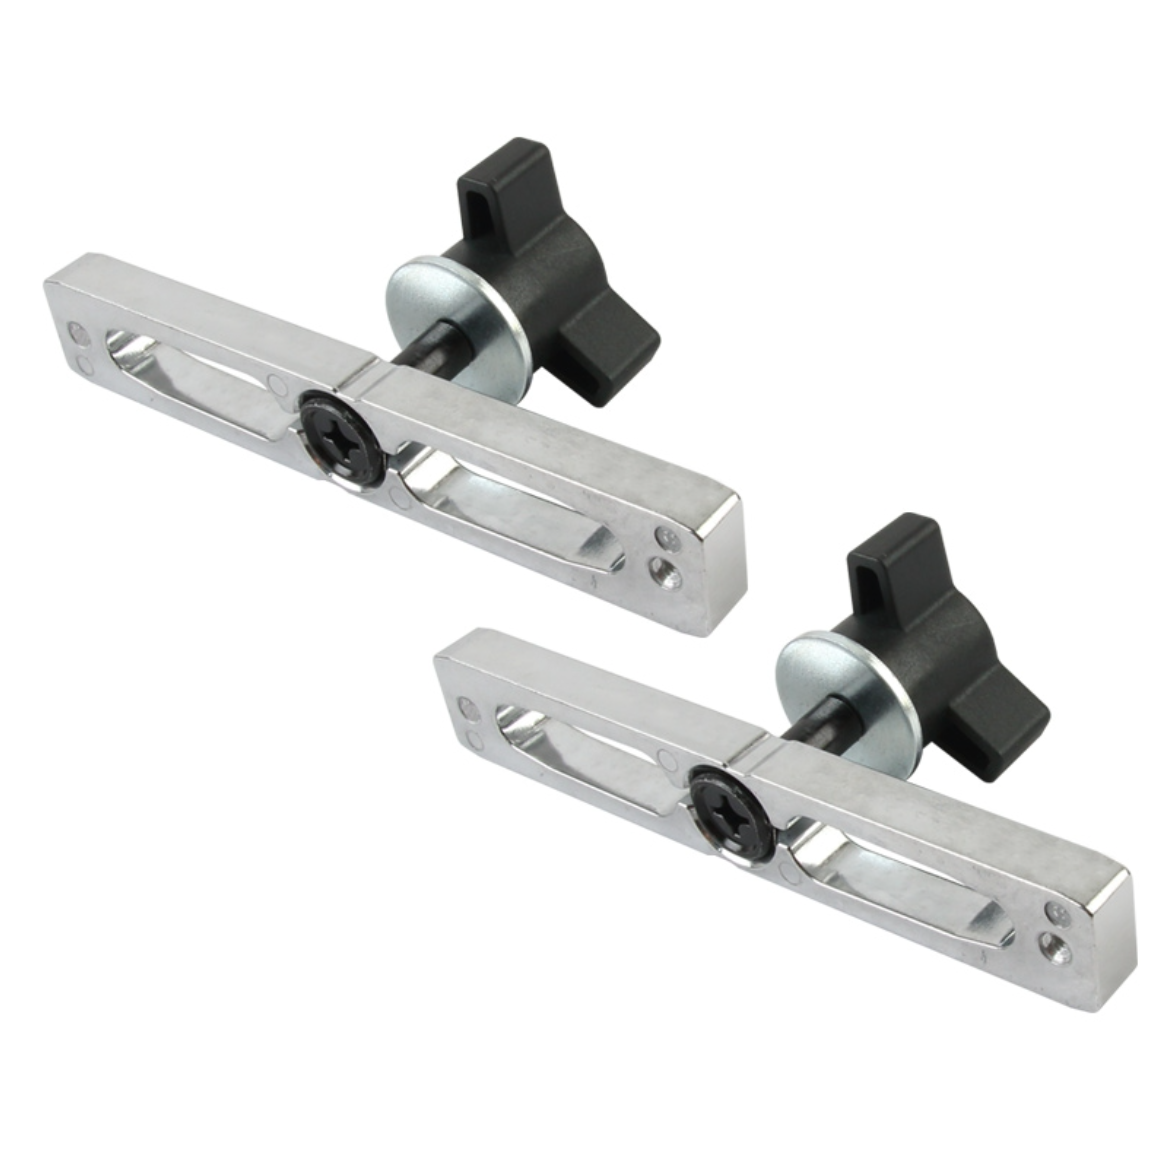 Adjustable Fence Clamp (2 Pack)